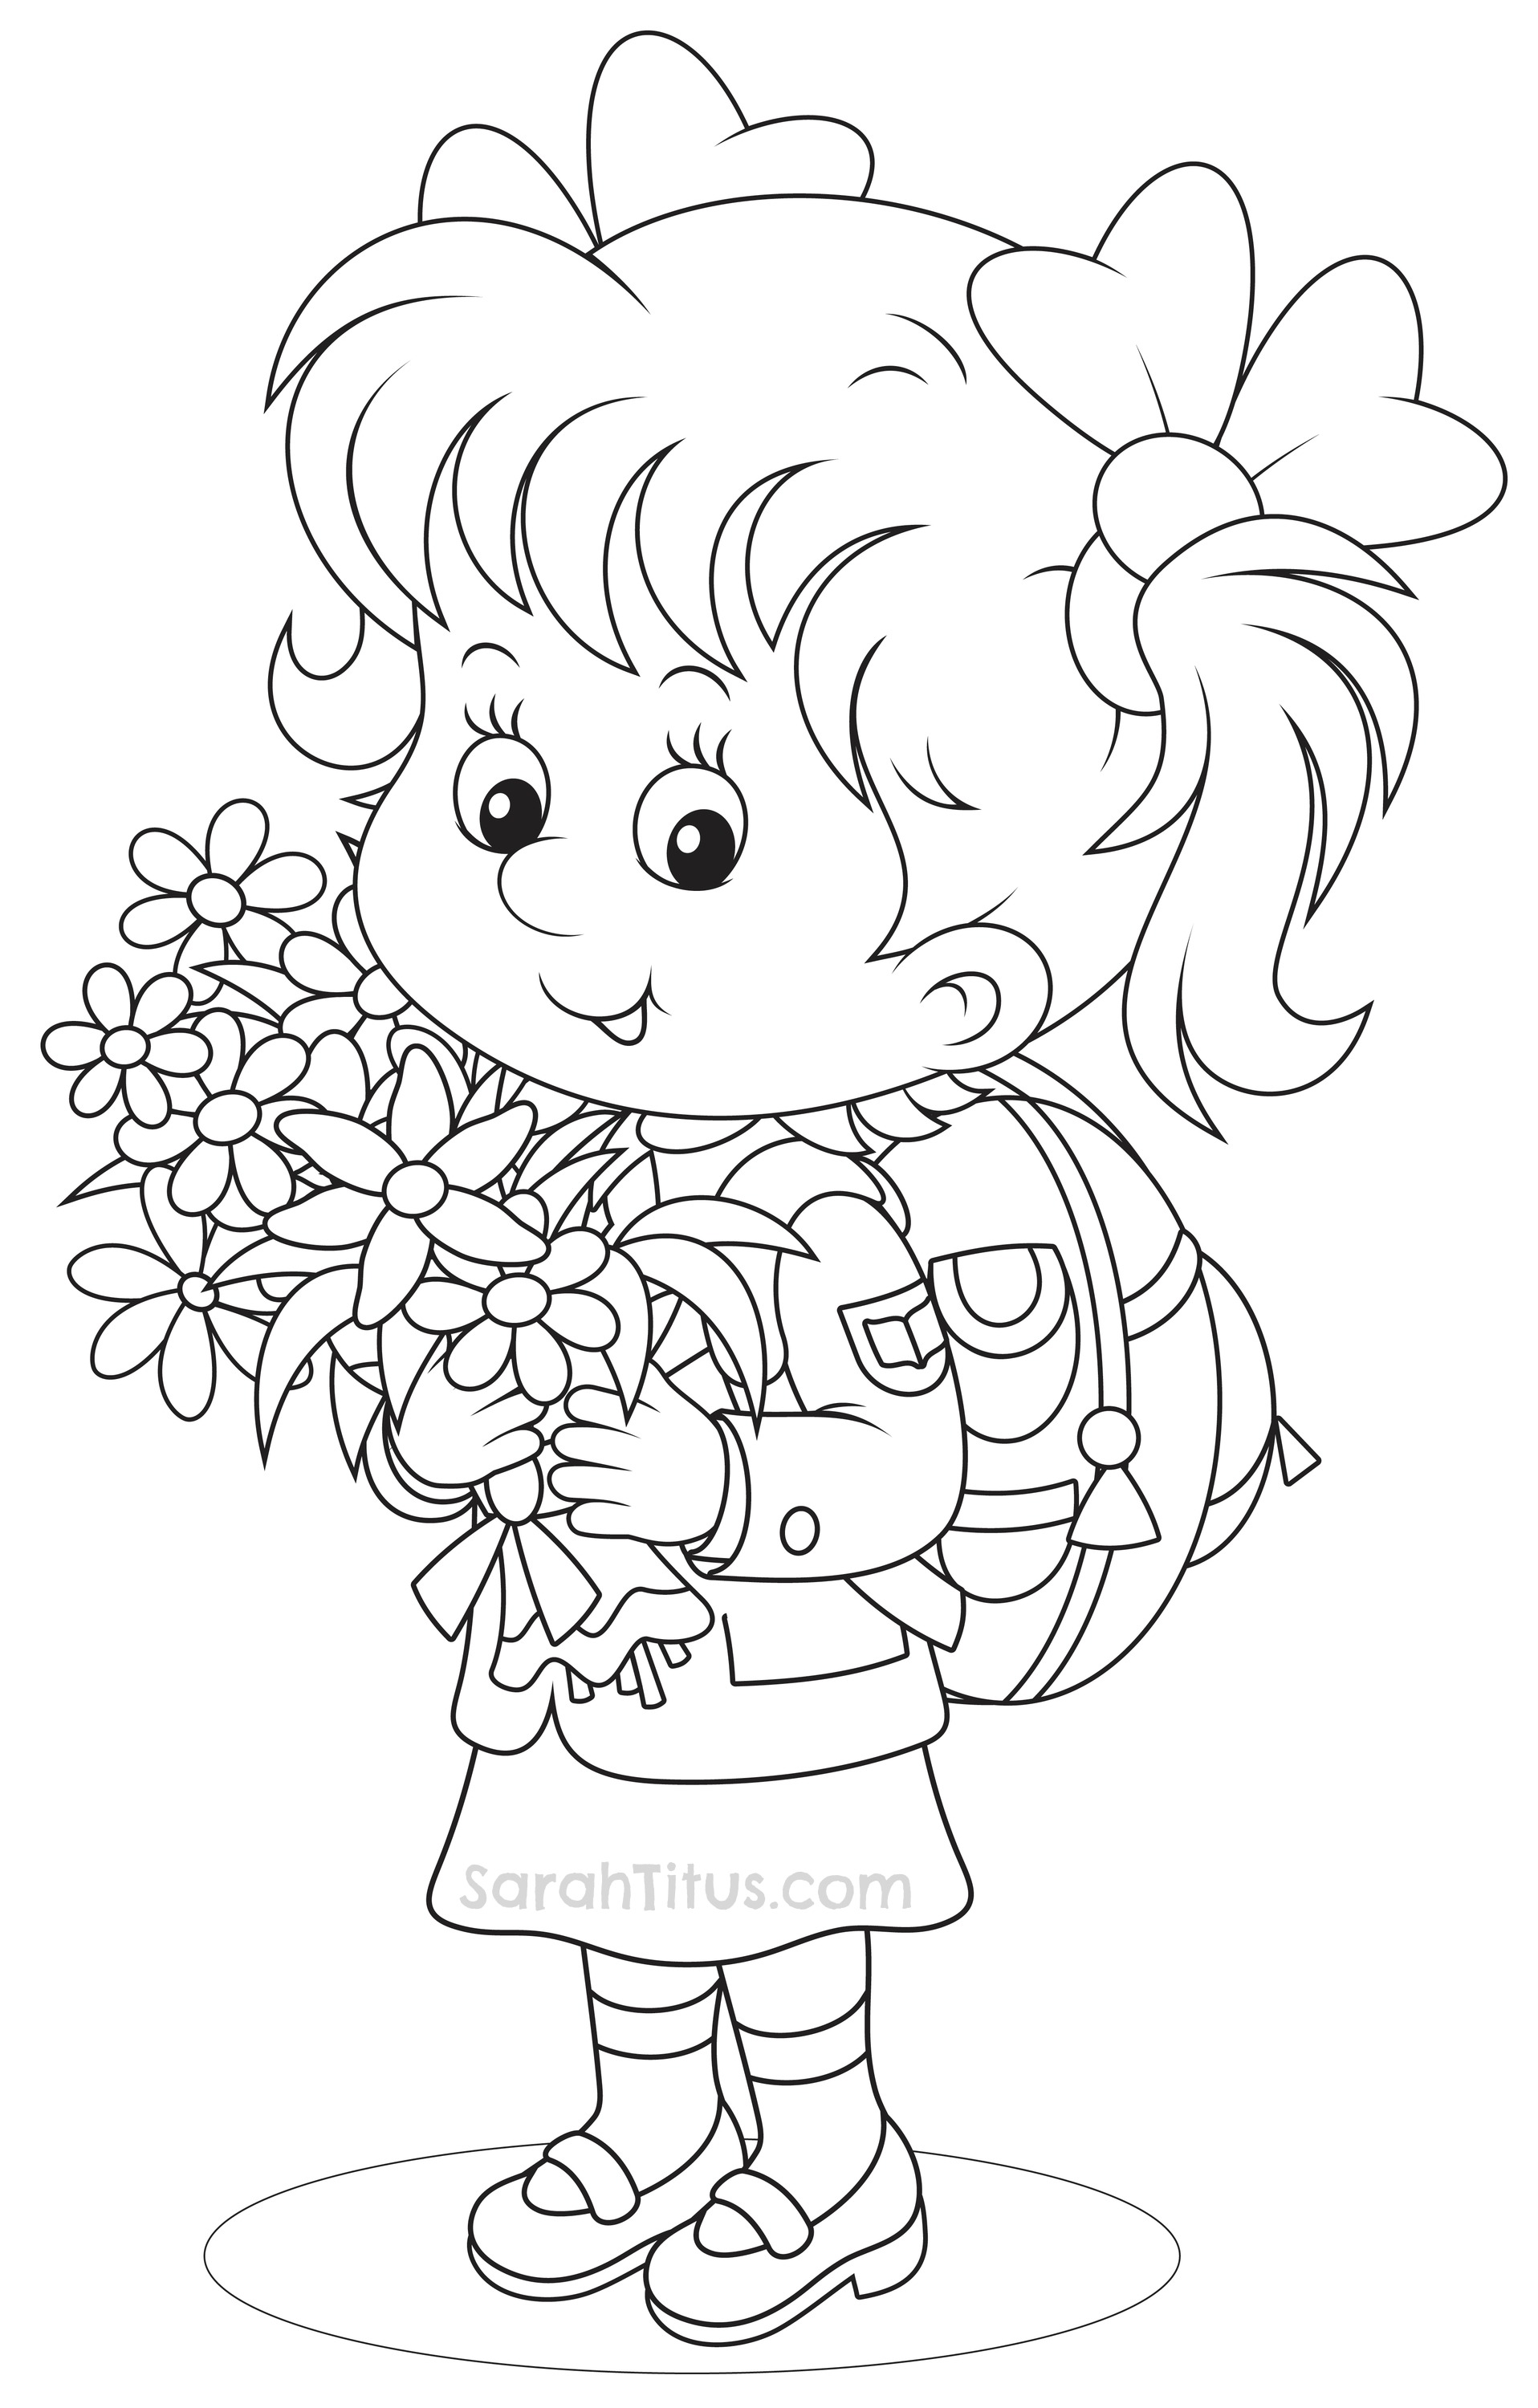 back-to-school-coloring-pages-sarah-titus